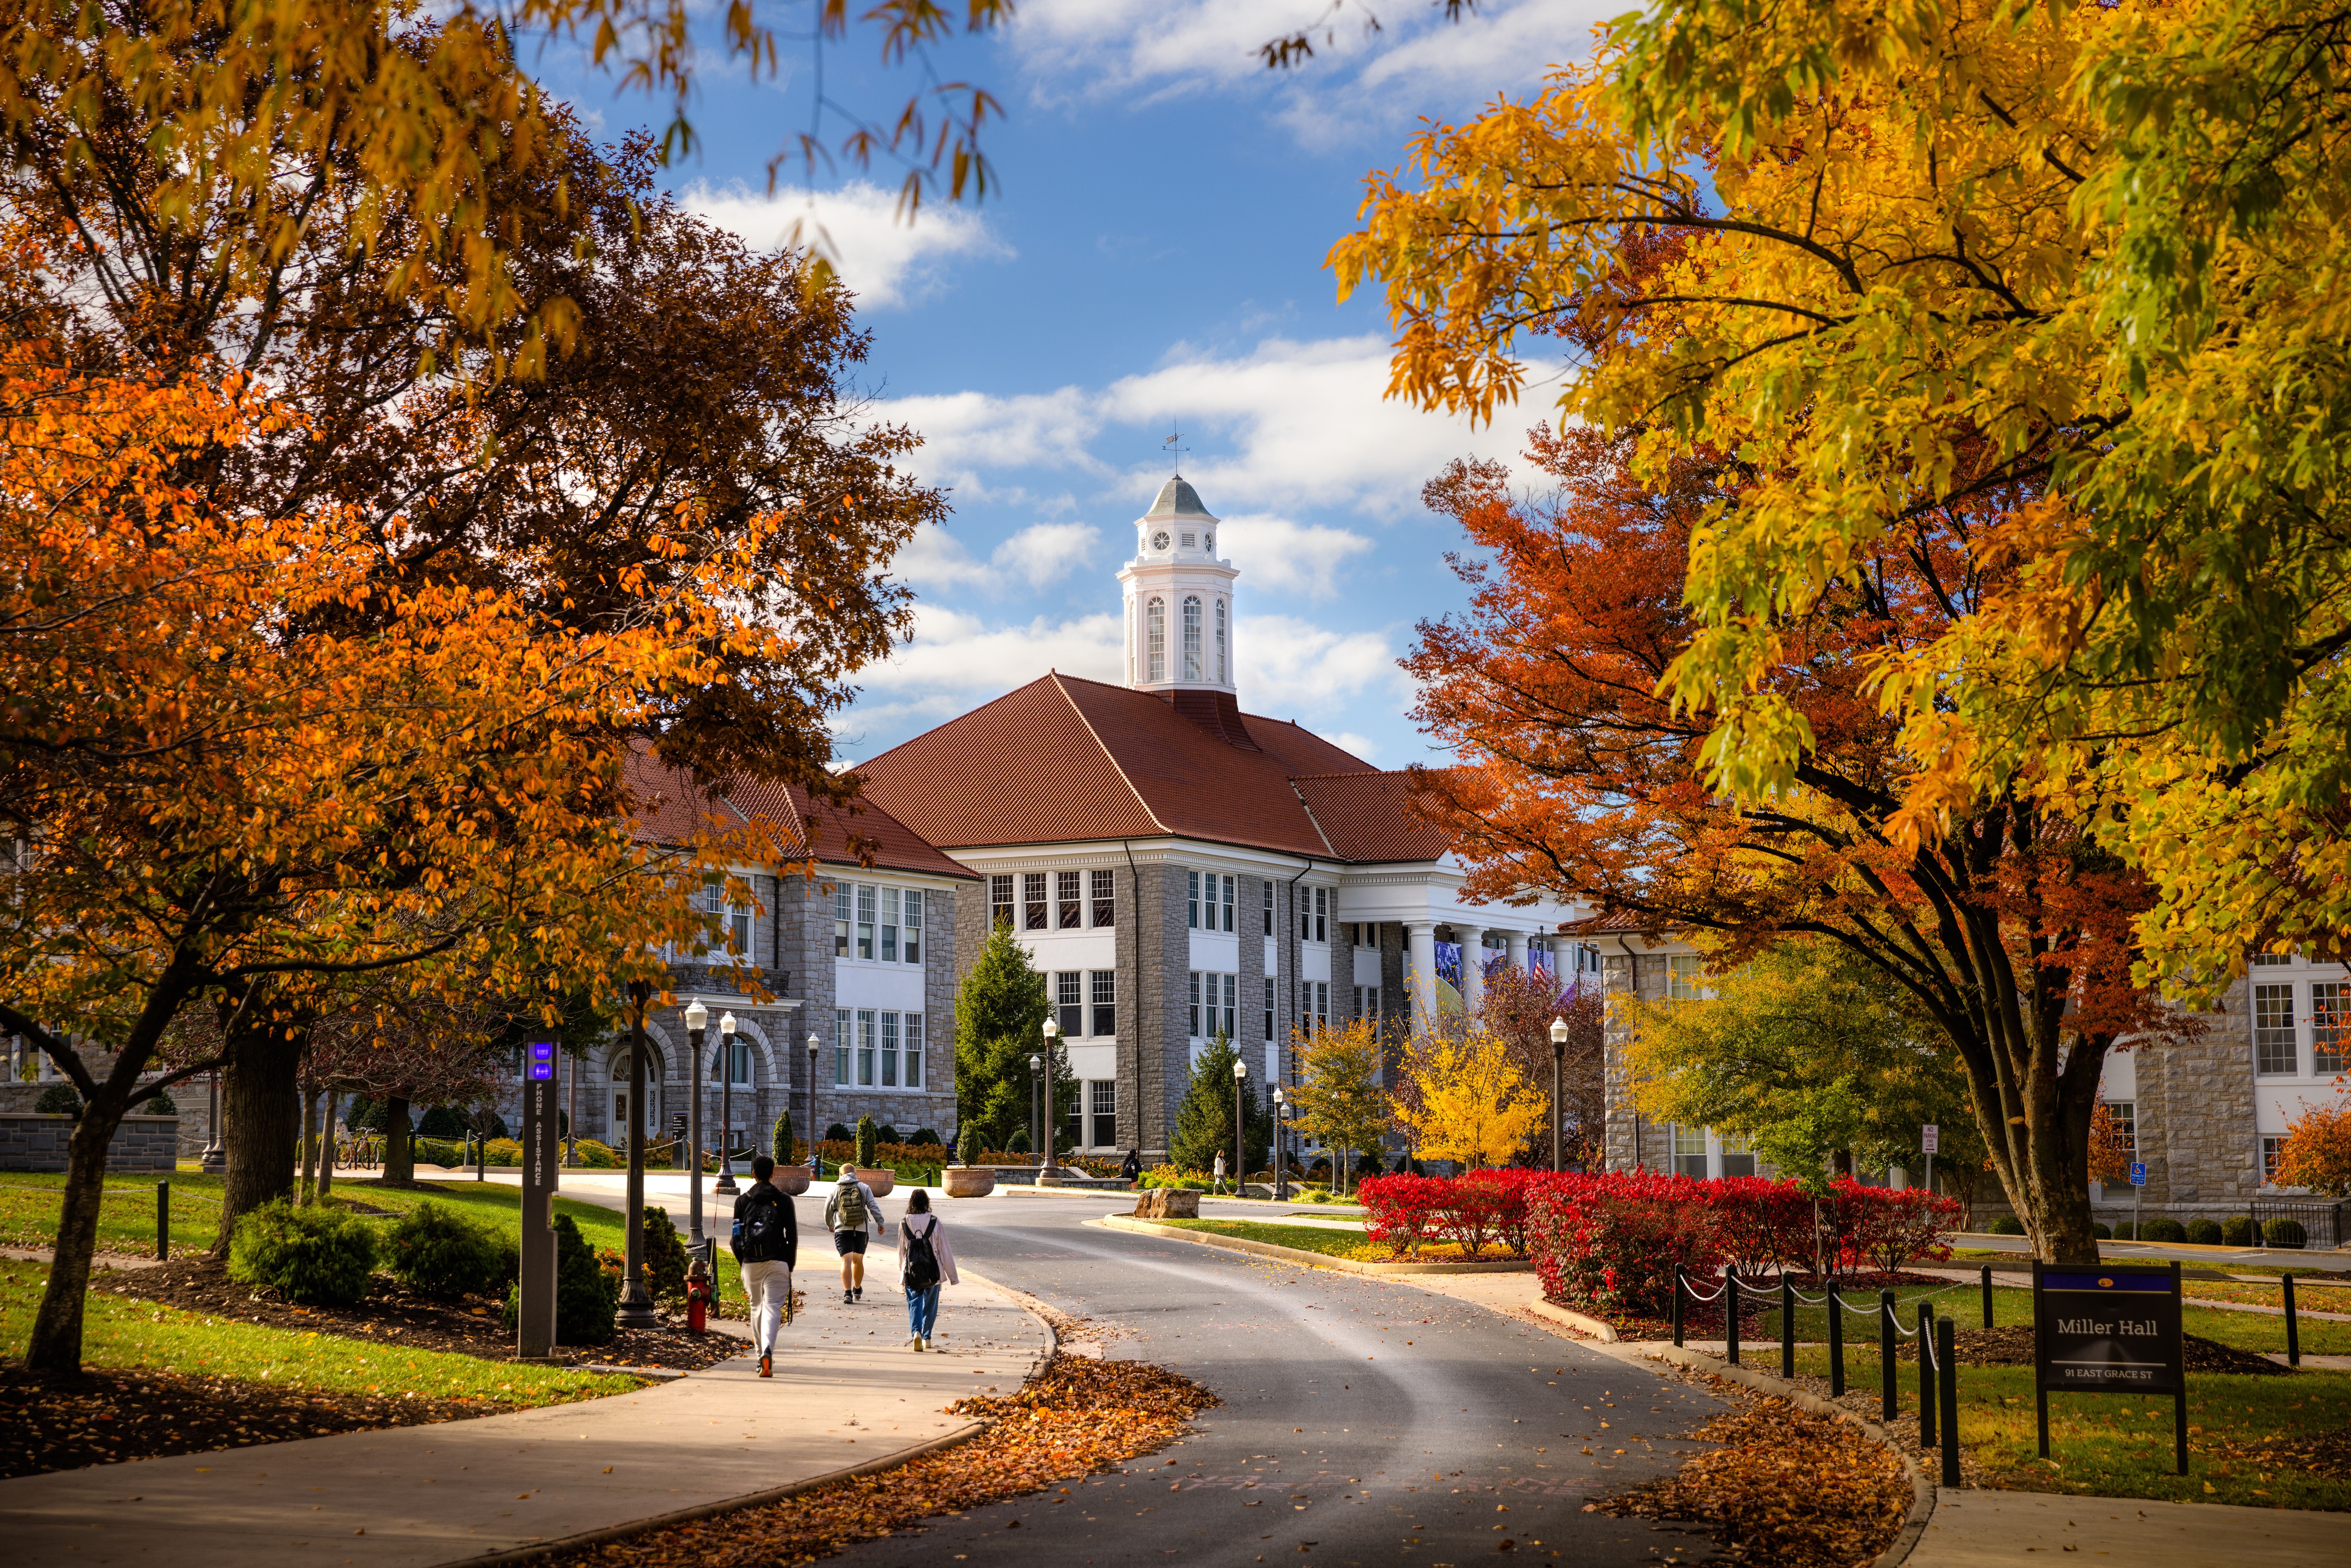 Students walking along a street at James Madison University in autumn.